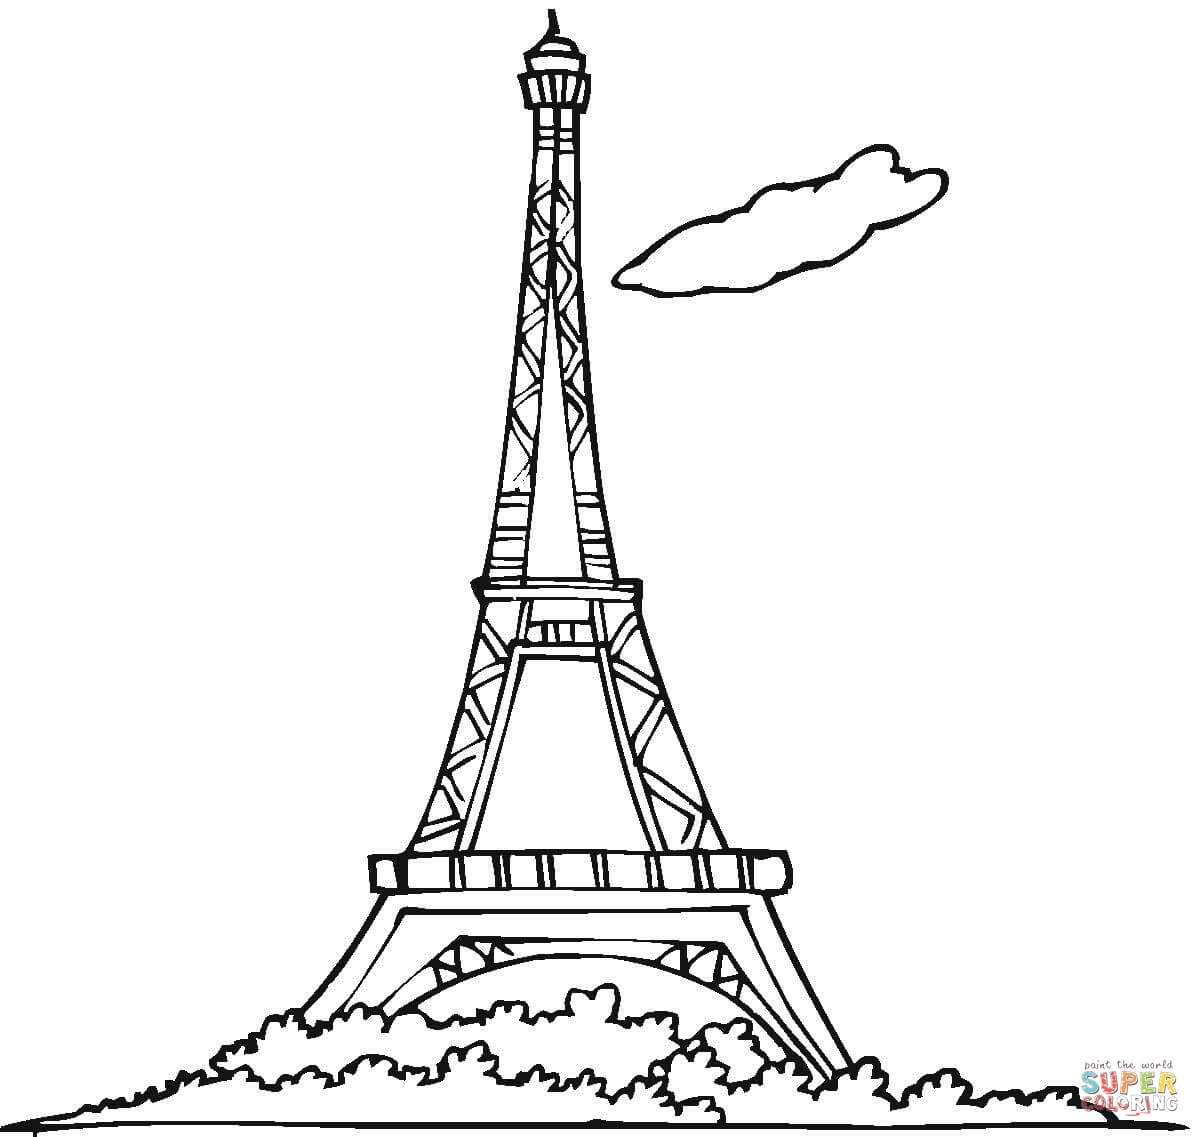 Tower of Babel coloring page | Free Printable Coloring Pages